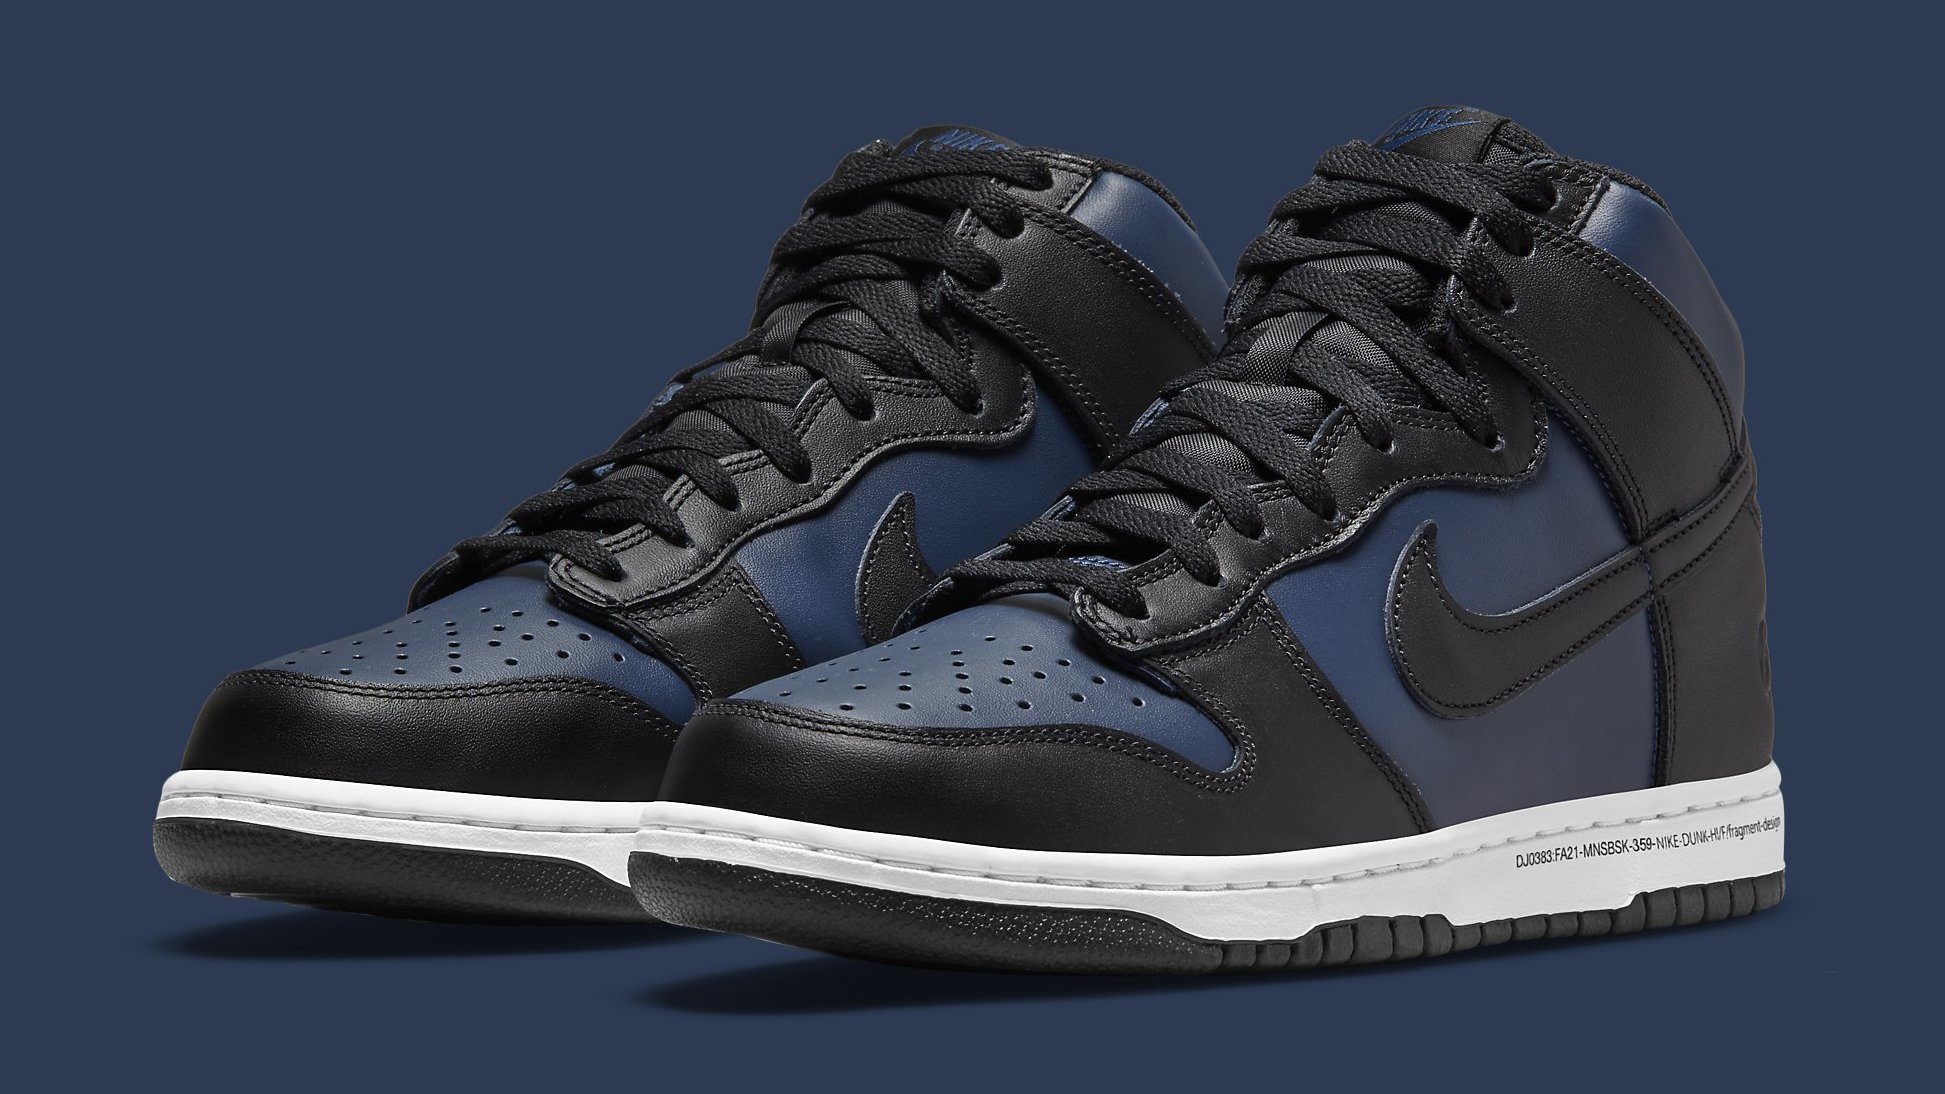 Best Look Yet at the 'Japan' Fragment x Nike Dunk Collab | Complex